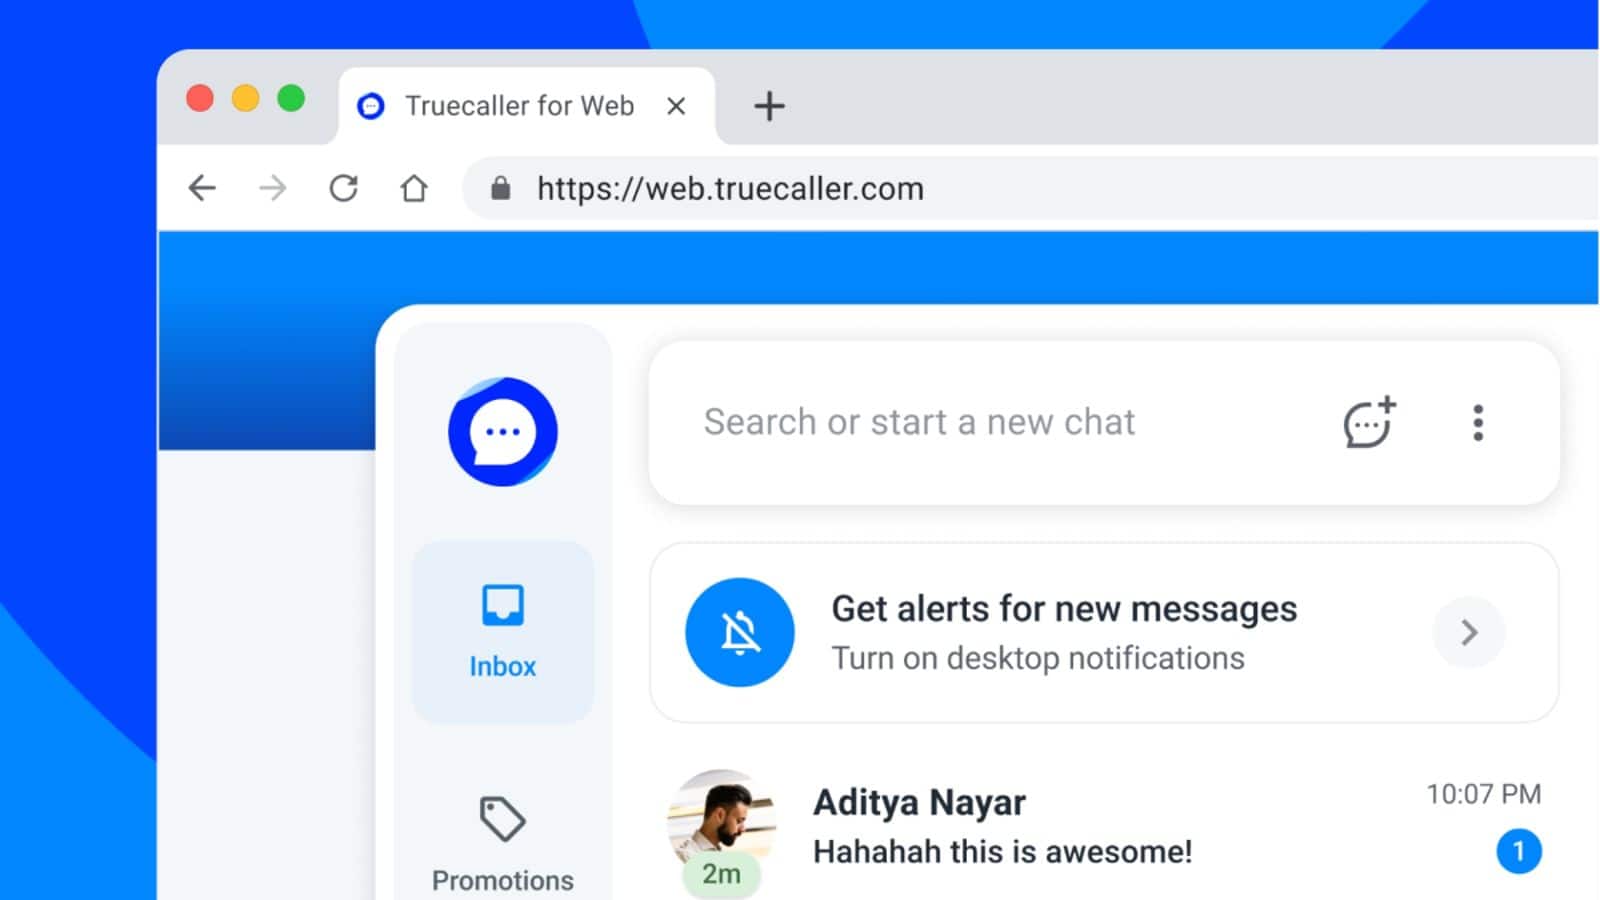 Truecaller launches web-based service for Android users in India